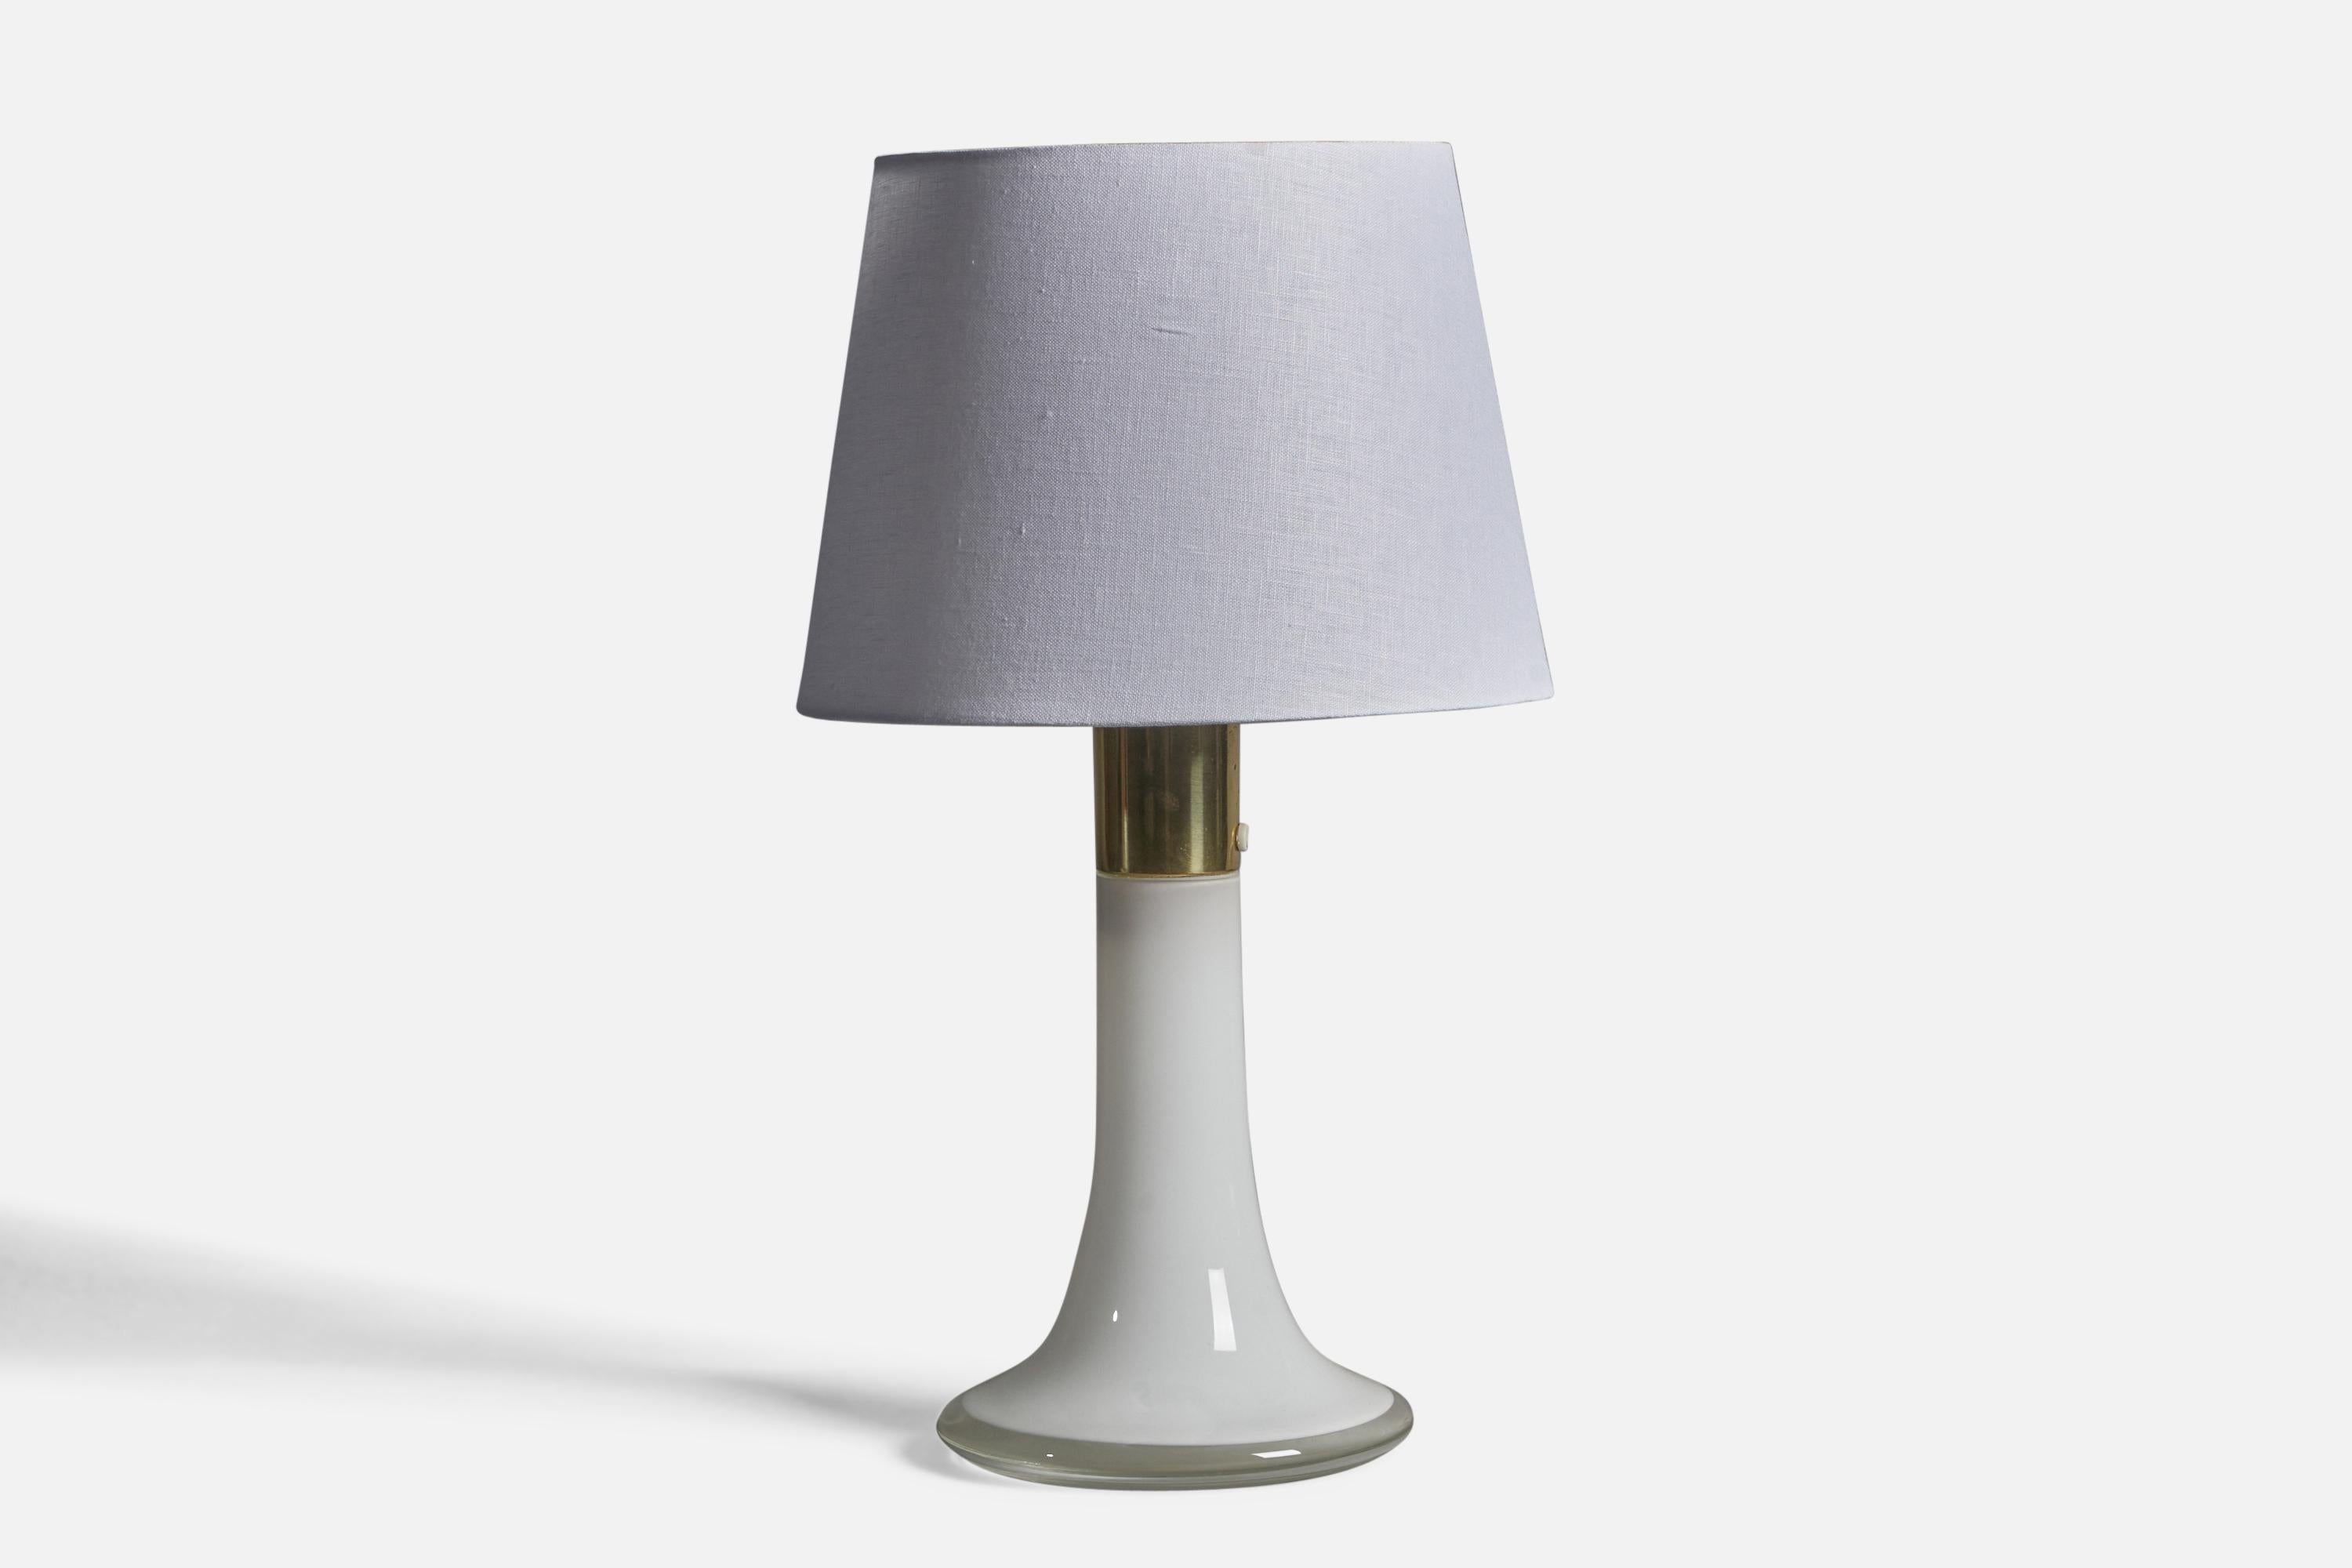 A chome metal and opaline glass table lamp, designed by Lisa Johansson-Pape and produced by Ornö, OY, Finland, 1960s.

Dimensions of Lamp (inches): 14.5